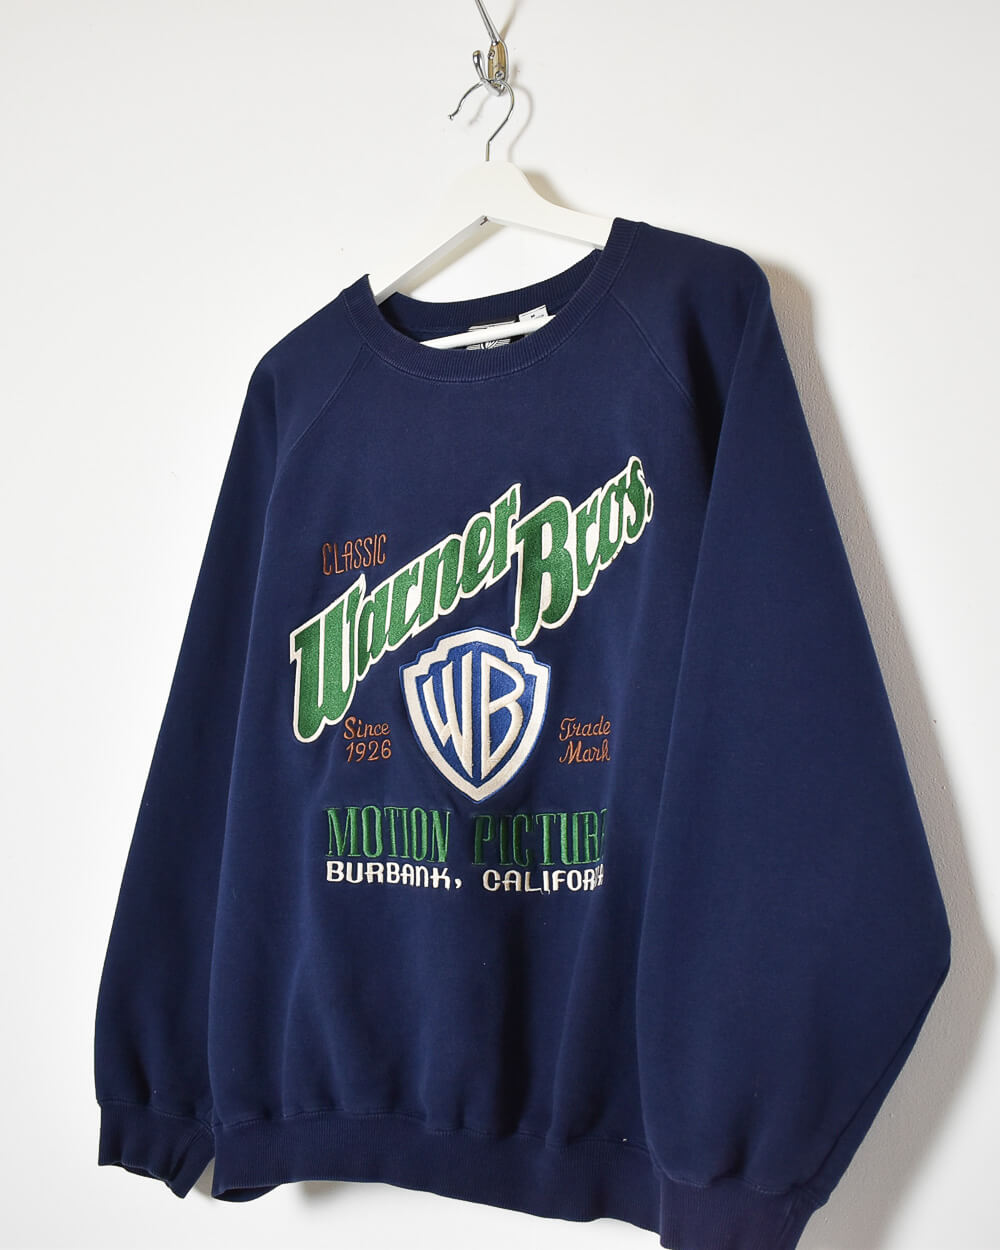 Vintage 90s Cotton Navy Warner Bros Since 1926 Motion Pictures